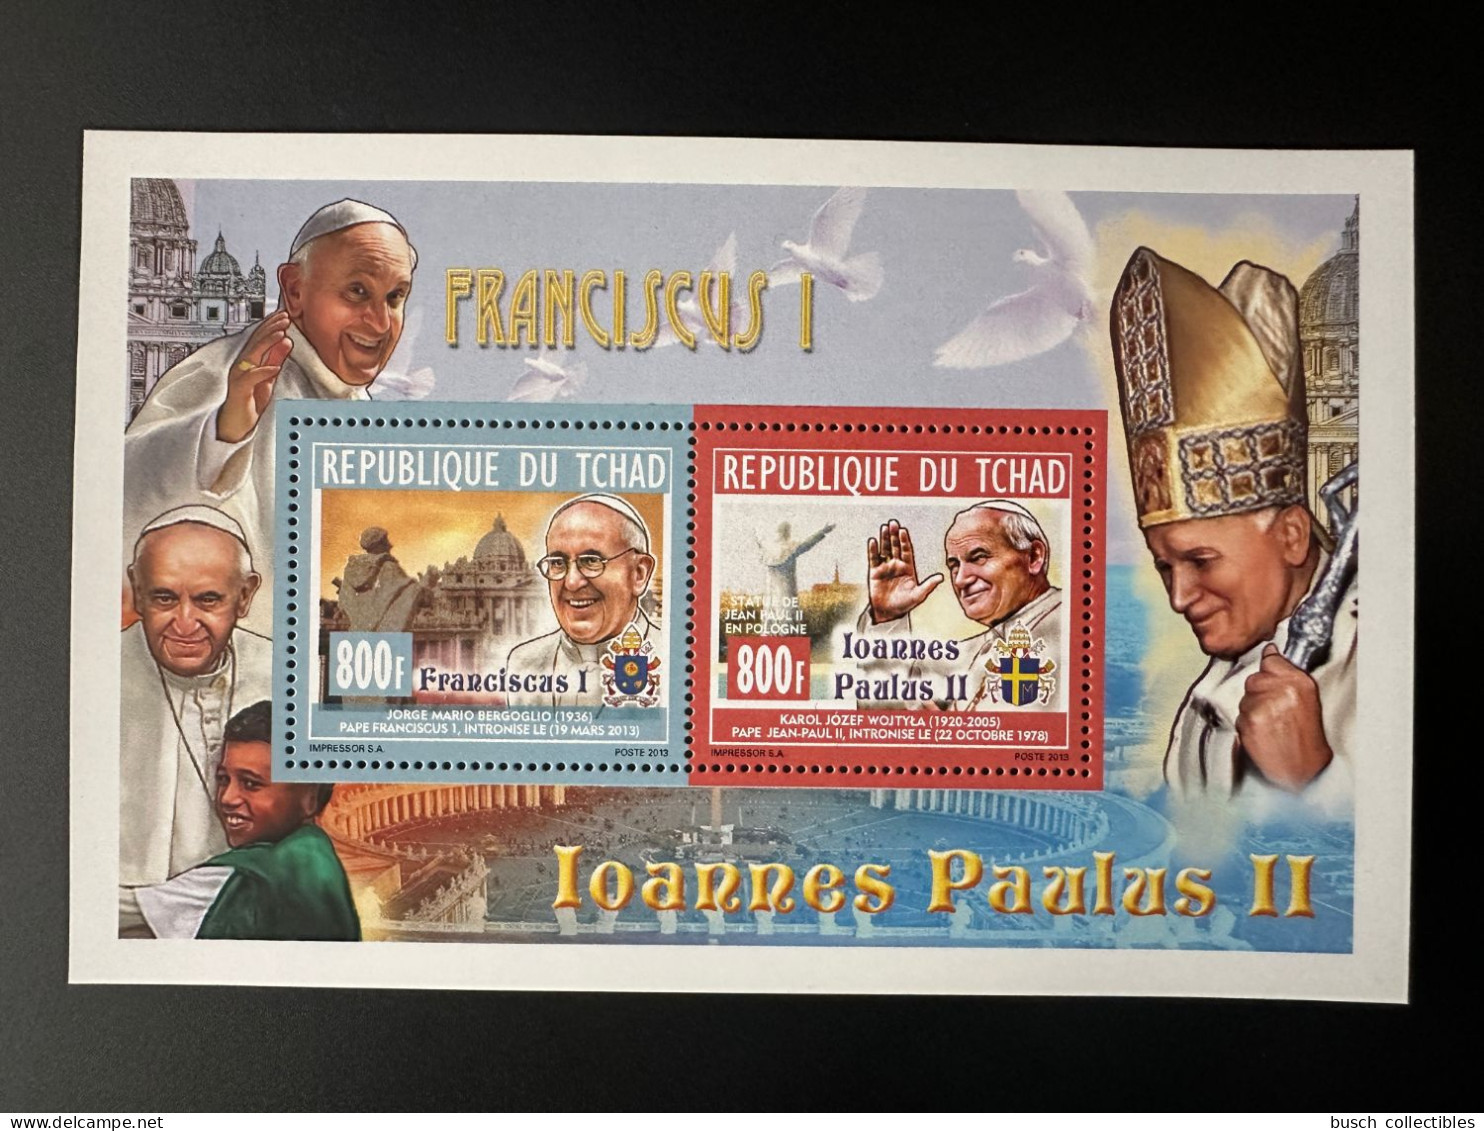 Tchad Chad Tschad 2014 Illustrated Mi. 2704 - 2705 Pape Jean-Paul II Papst Johannes Paul Pope John Paul Franciscus - Papes